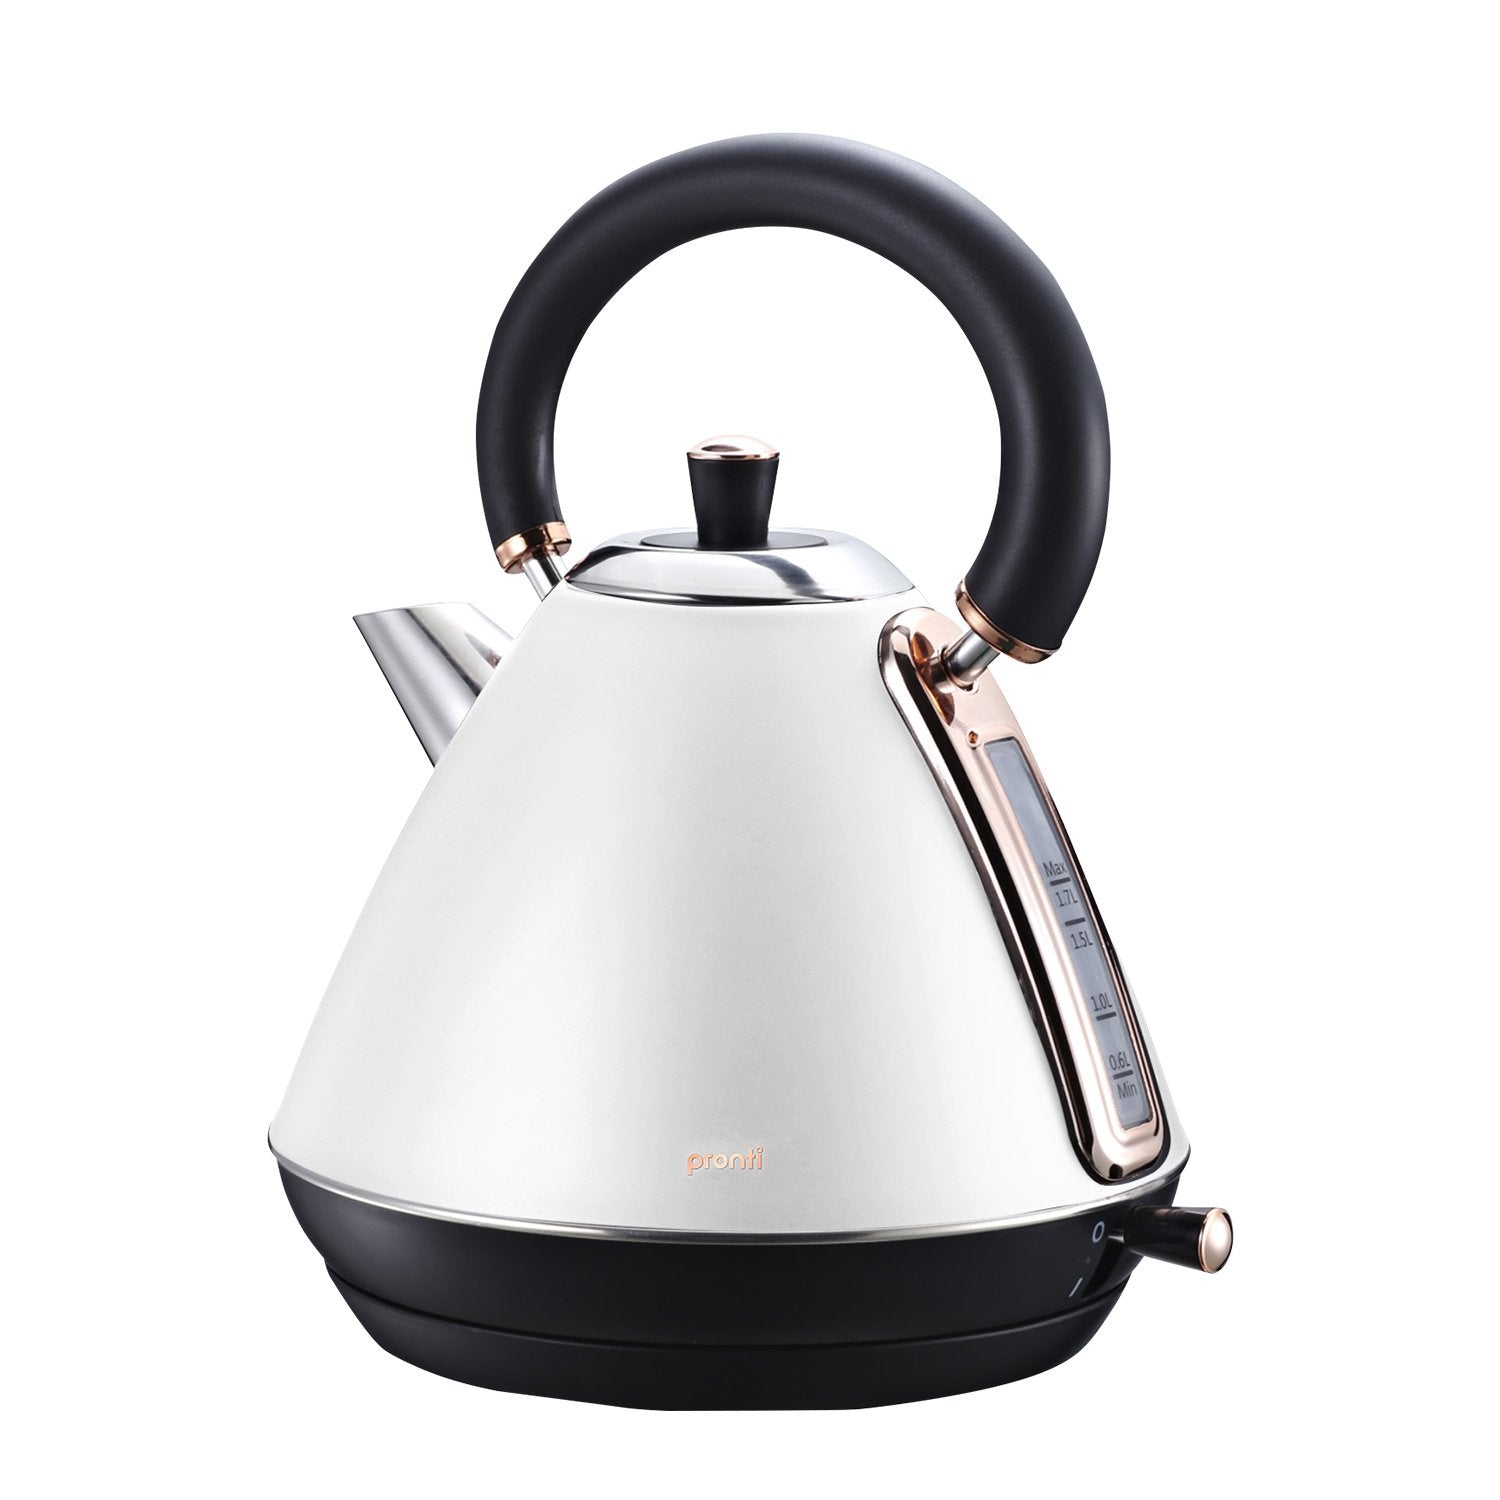 Pronti 1.7l Rose Trim Collection Kettle - White - SILBERSHELL